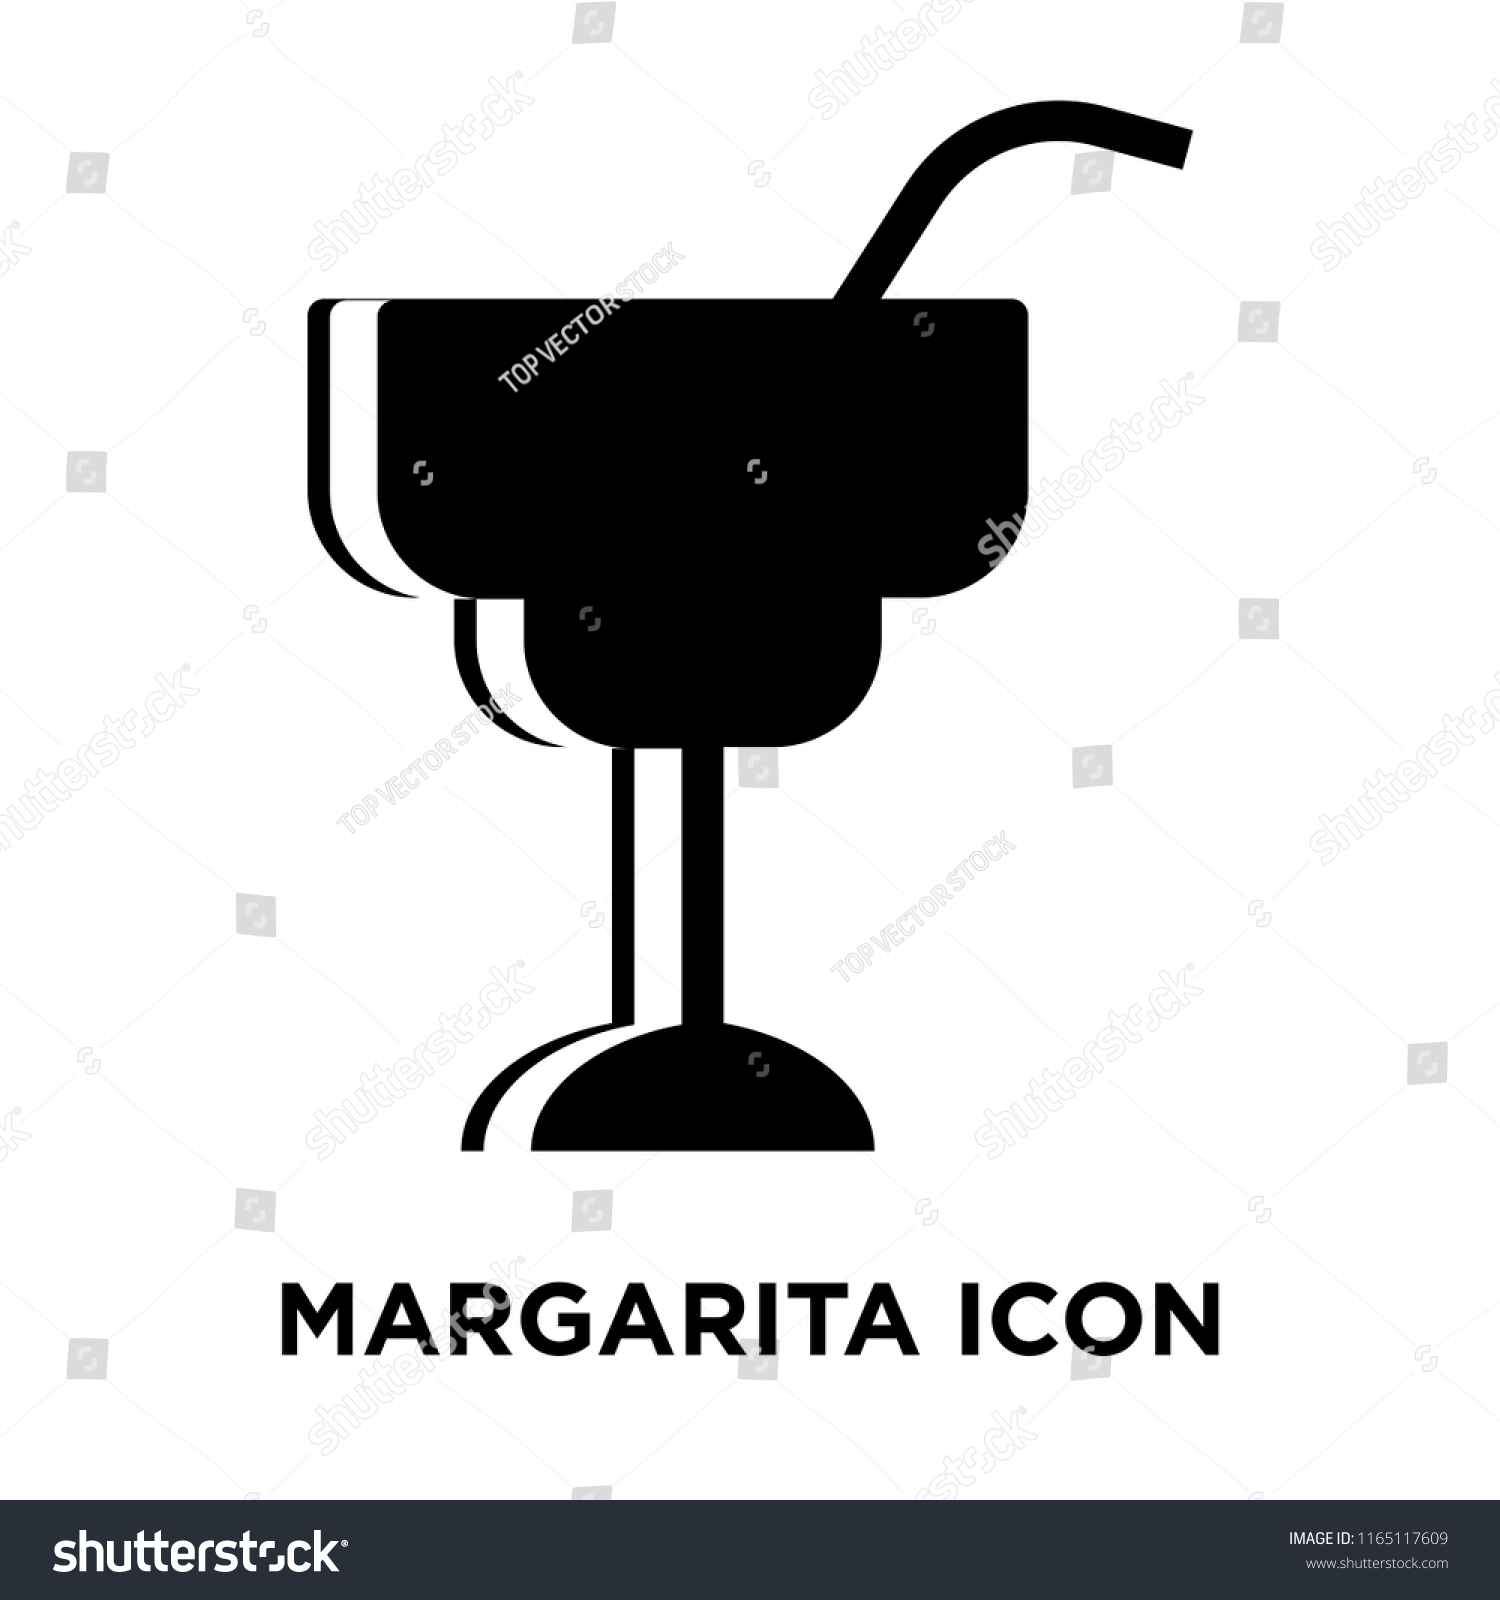 SVG of Margarita icon vector isolated on white background, Margarita transparent sign , food symbols svg